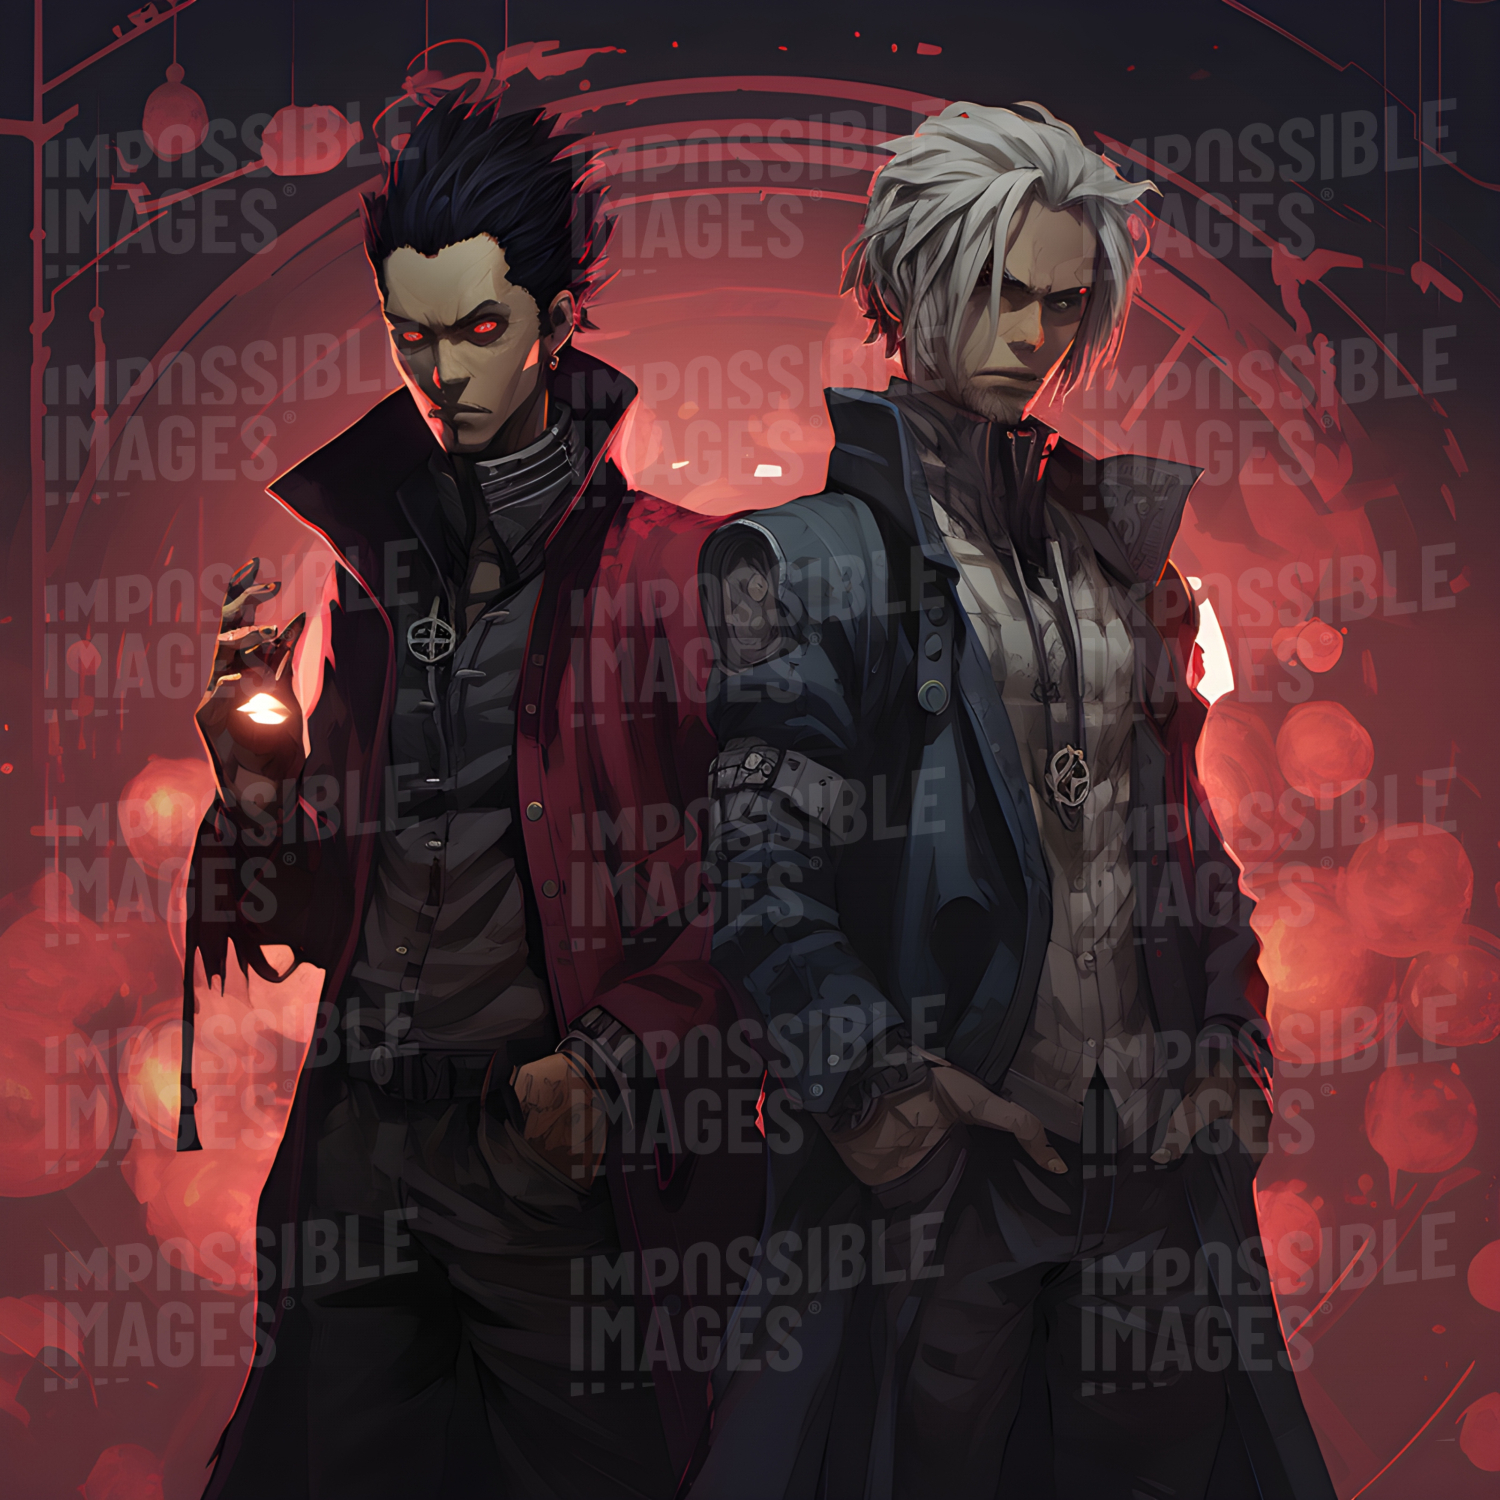 A duo of anime style sinister sorcerers -  Two mysterious anime-style sorcerers, shrouded in darkness, wield powerful magic and seek to control the world. Their motives remain unknown, but their power is undeniable.